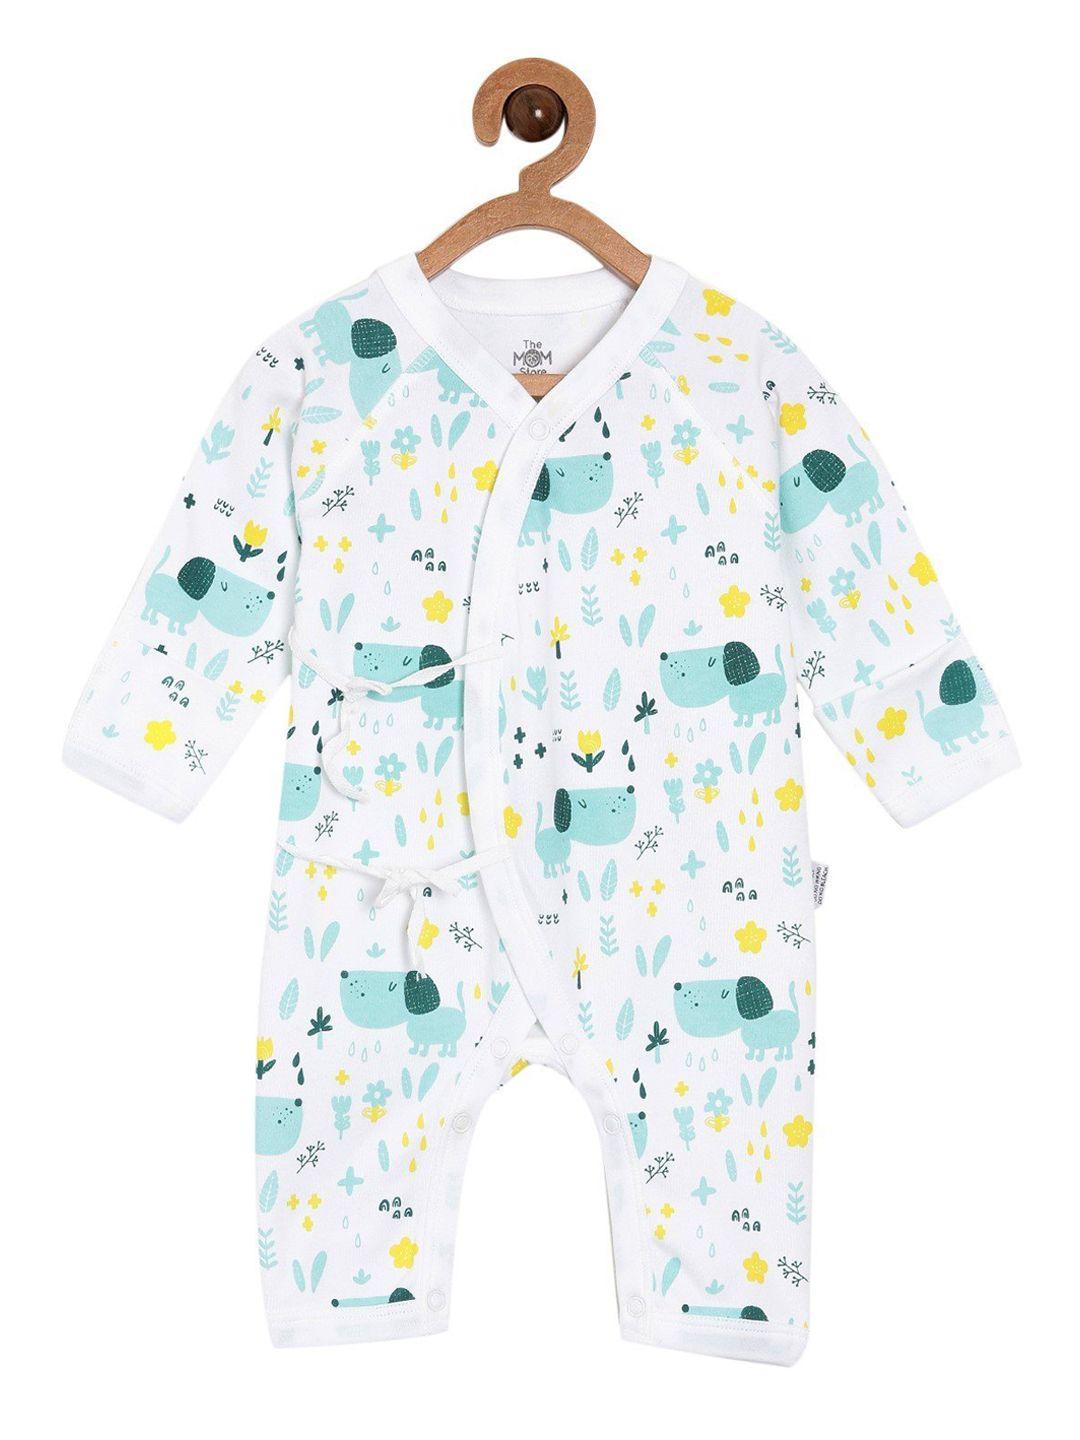 the-mom-store-infants-white-&-green-printed-cotton-rompers